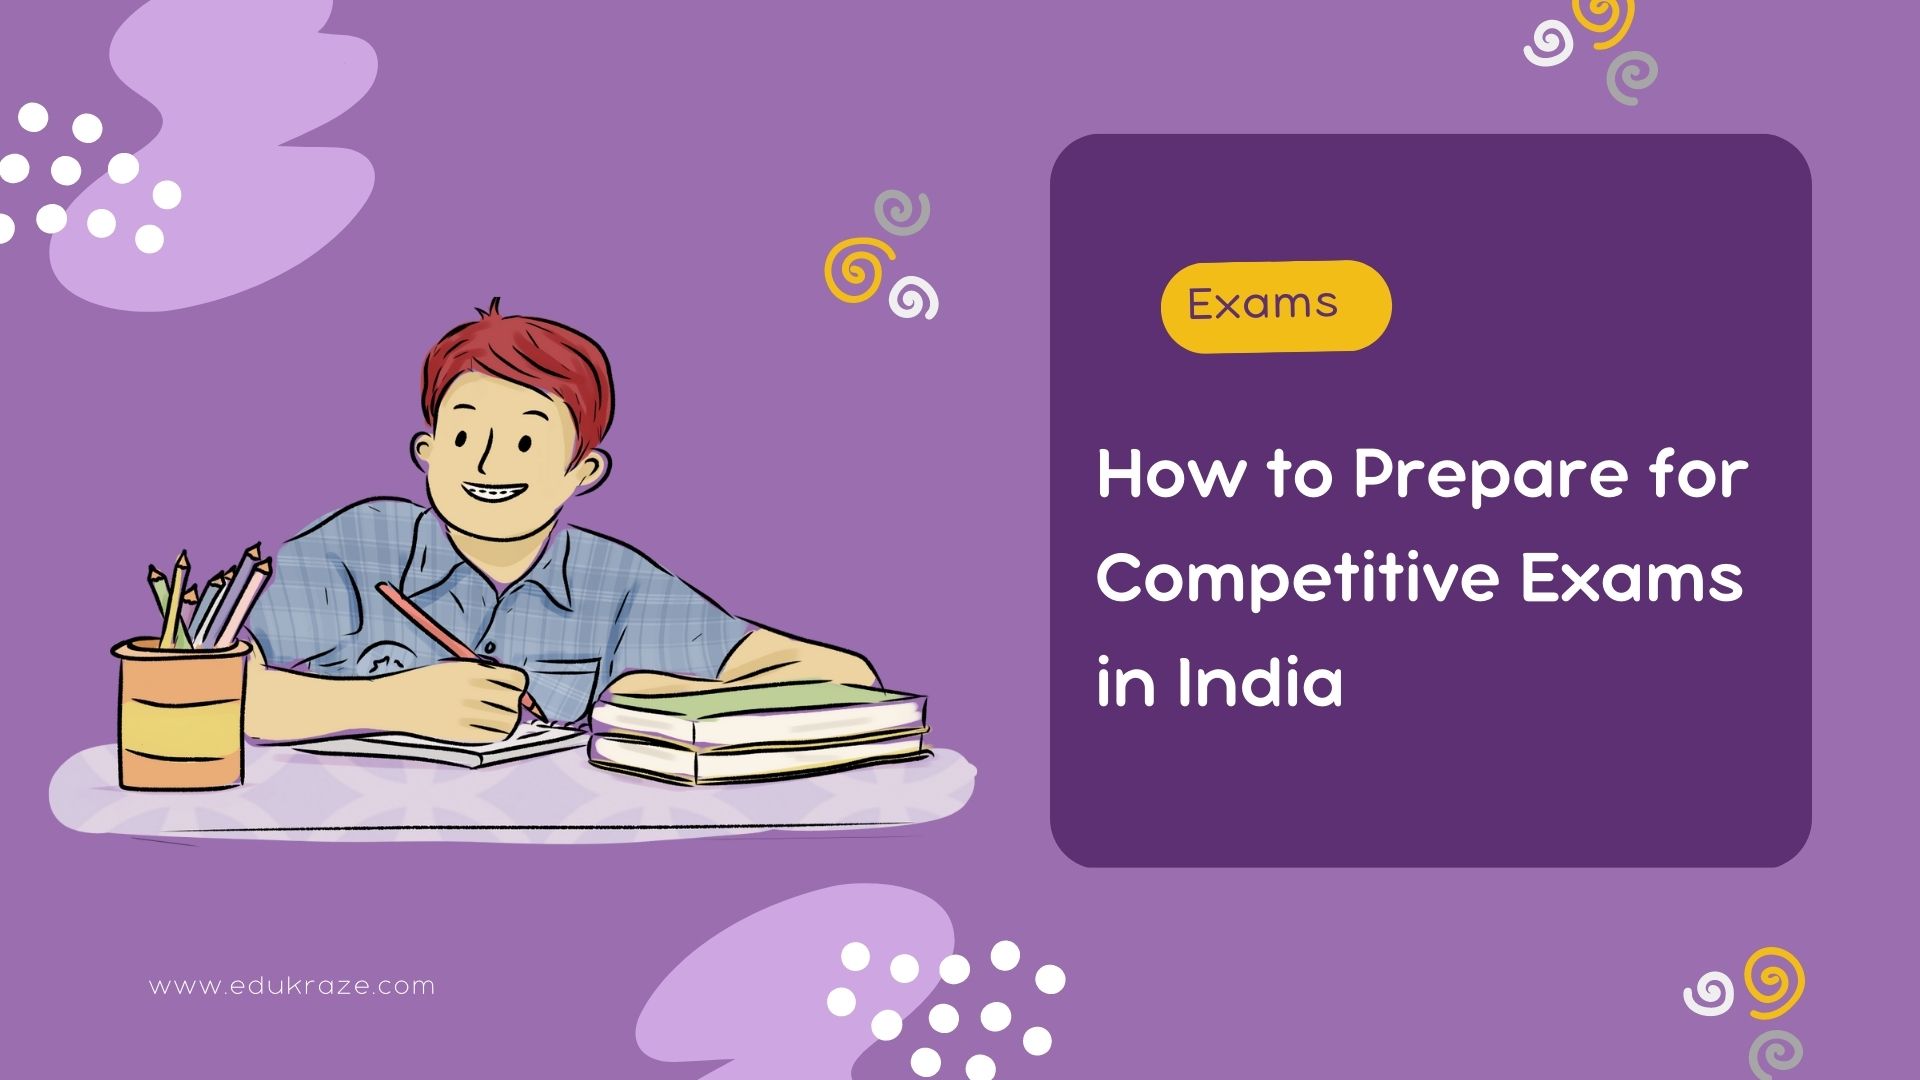 How to Prepare for Competitive Exams in India: Tips and Tricks